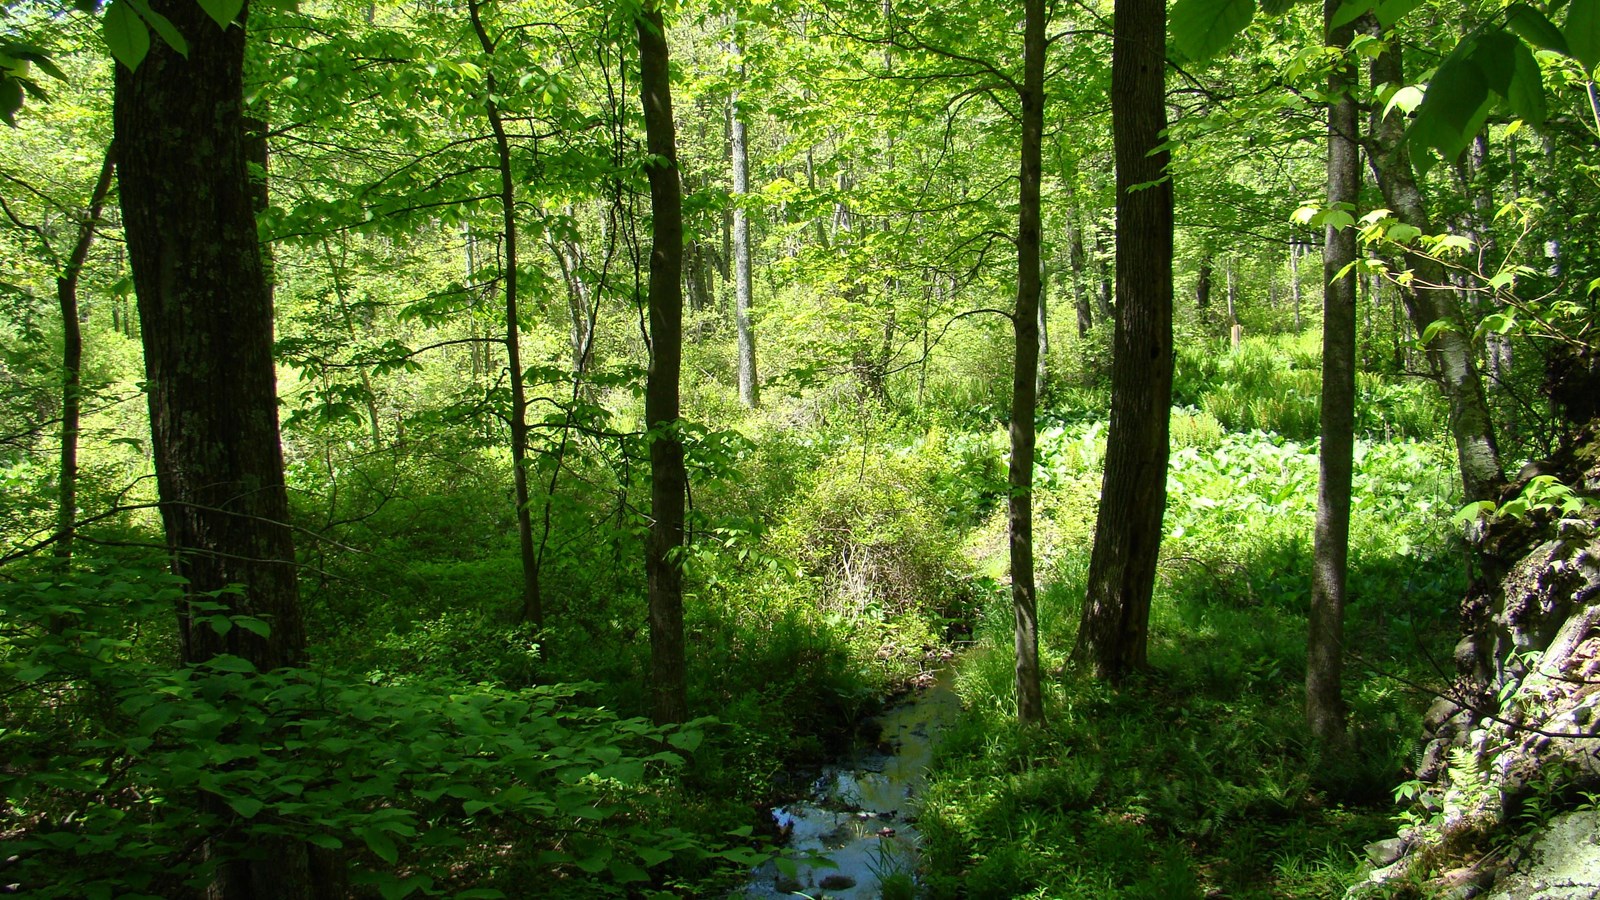 A green forest with several green trees, small green plants, and a creek flowing through